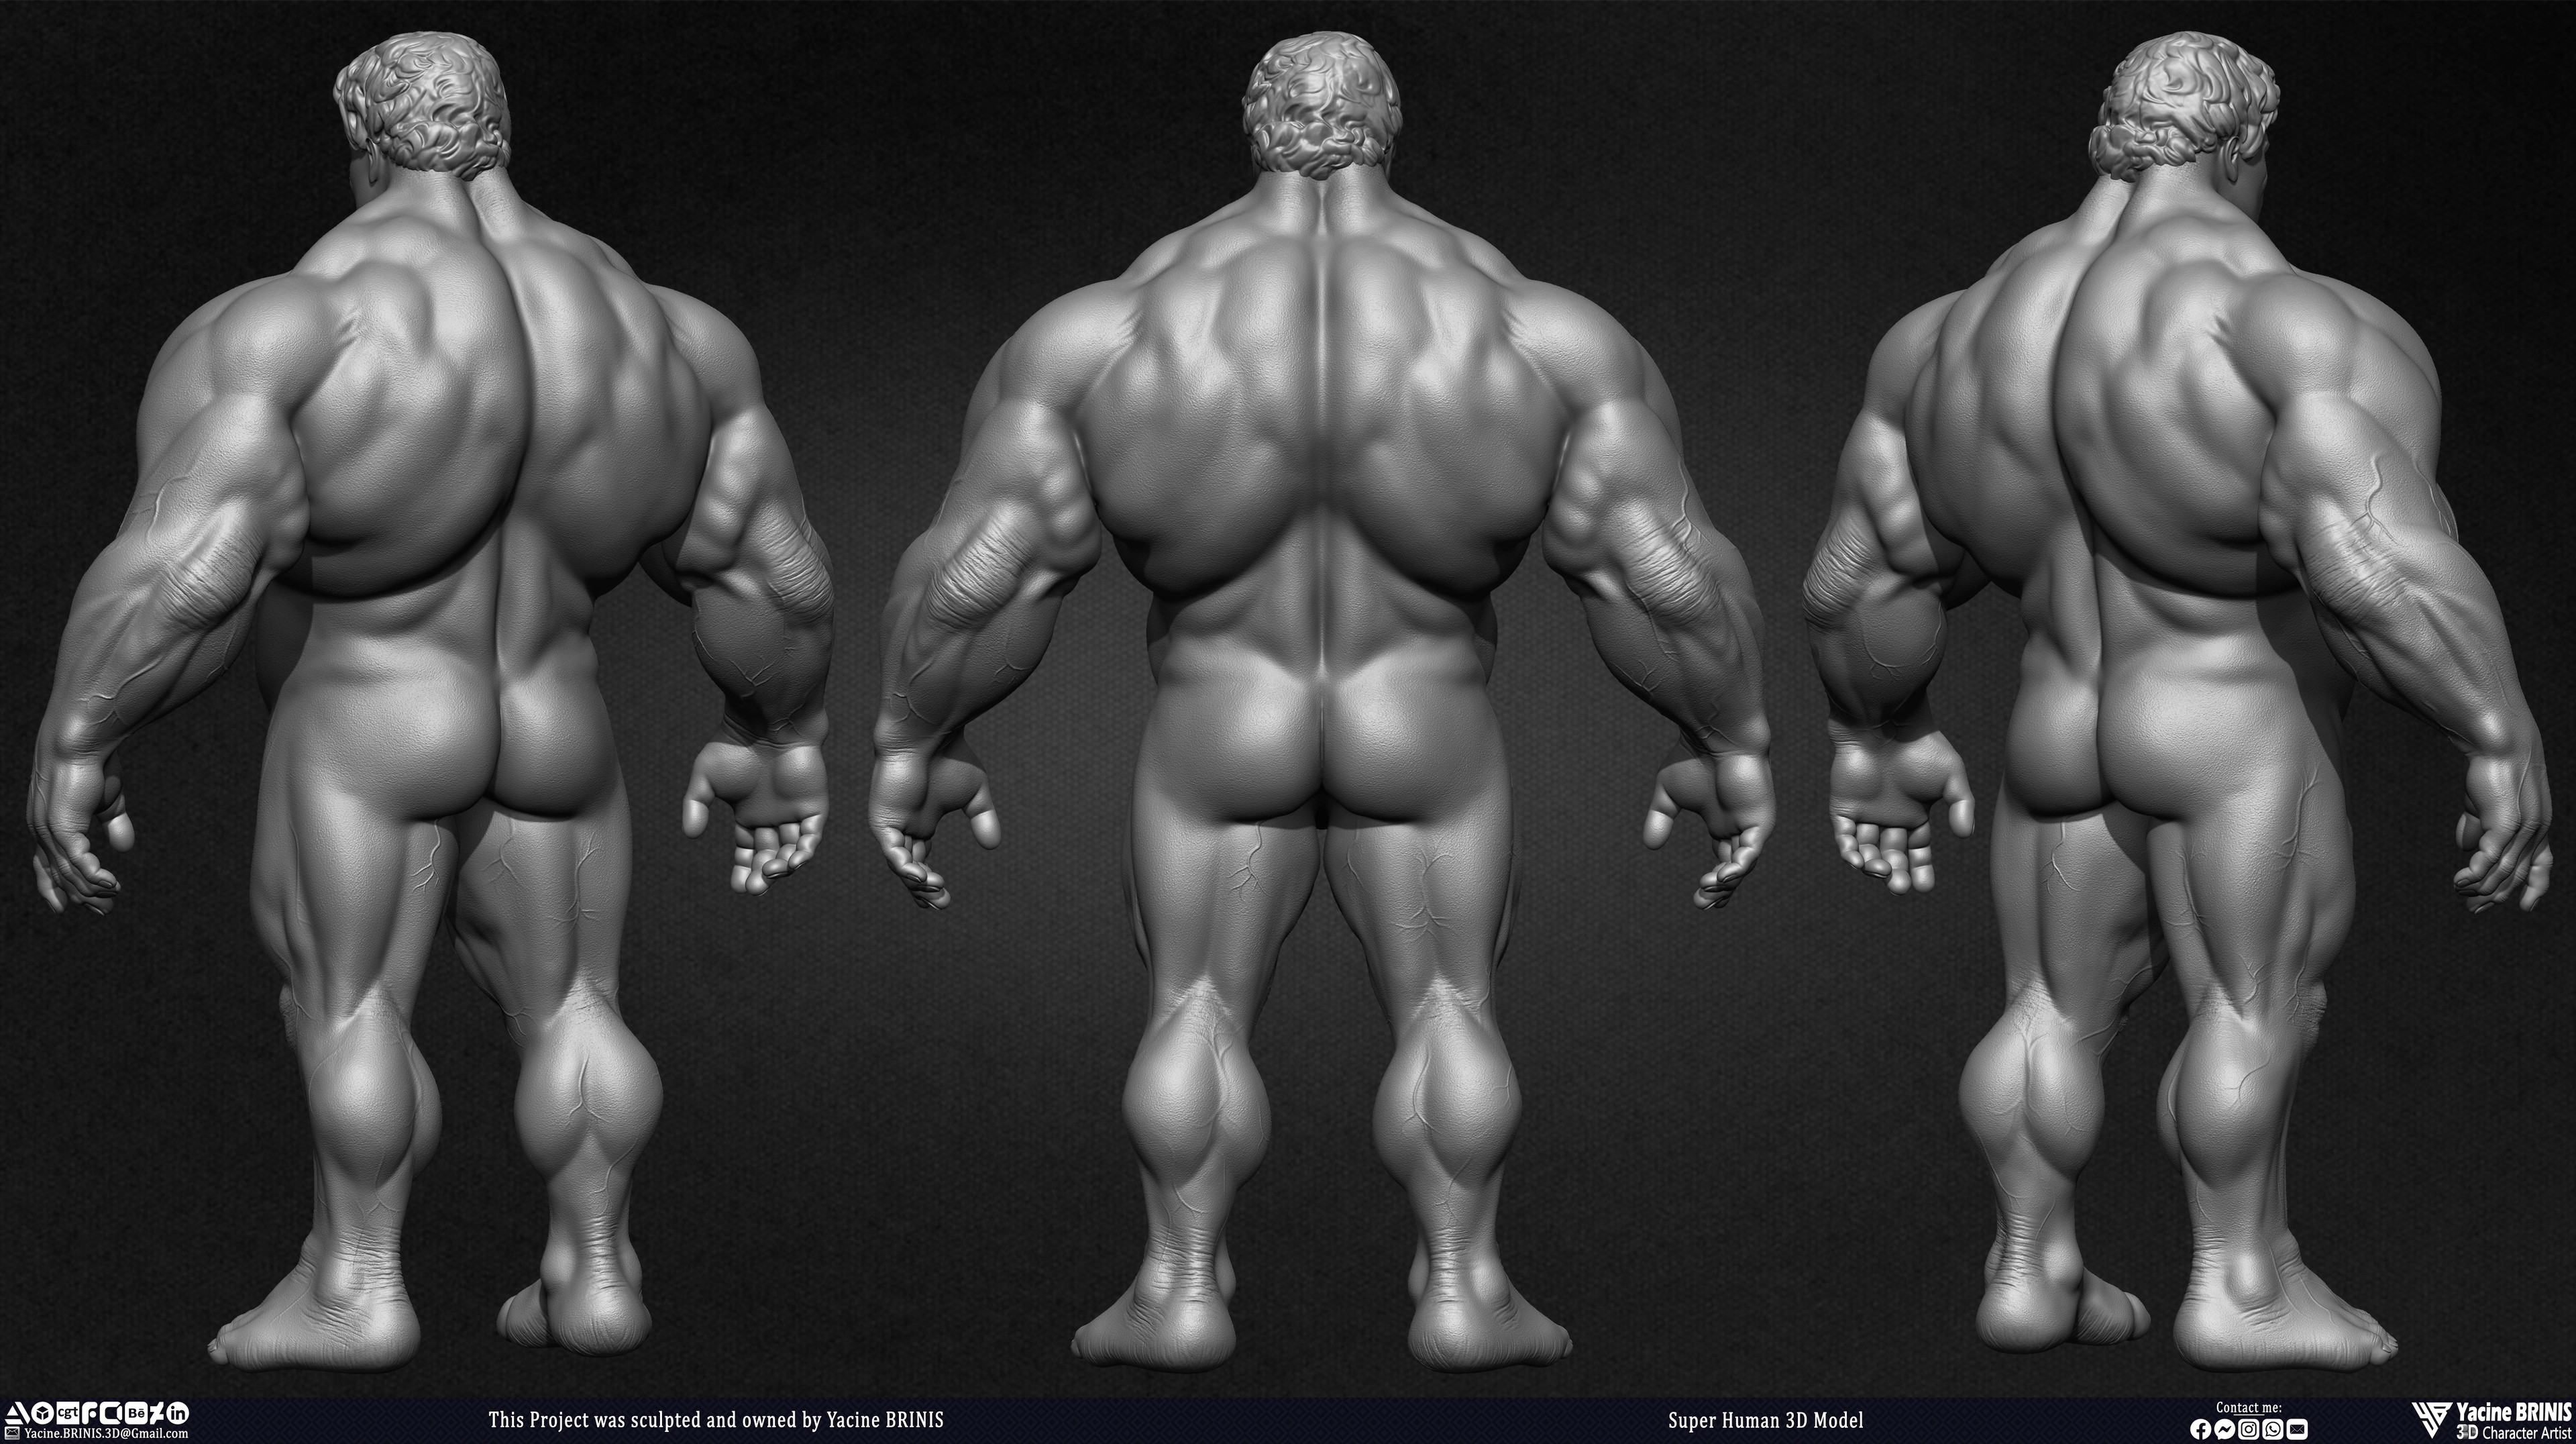 Super Human 3D Model sculpted by Yacine BRINIS 004